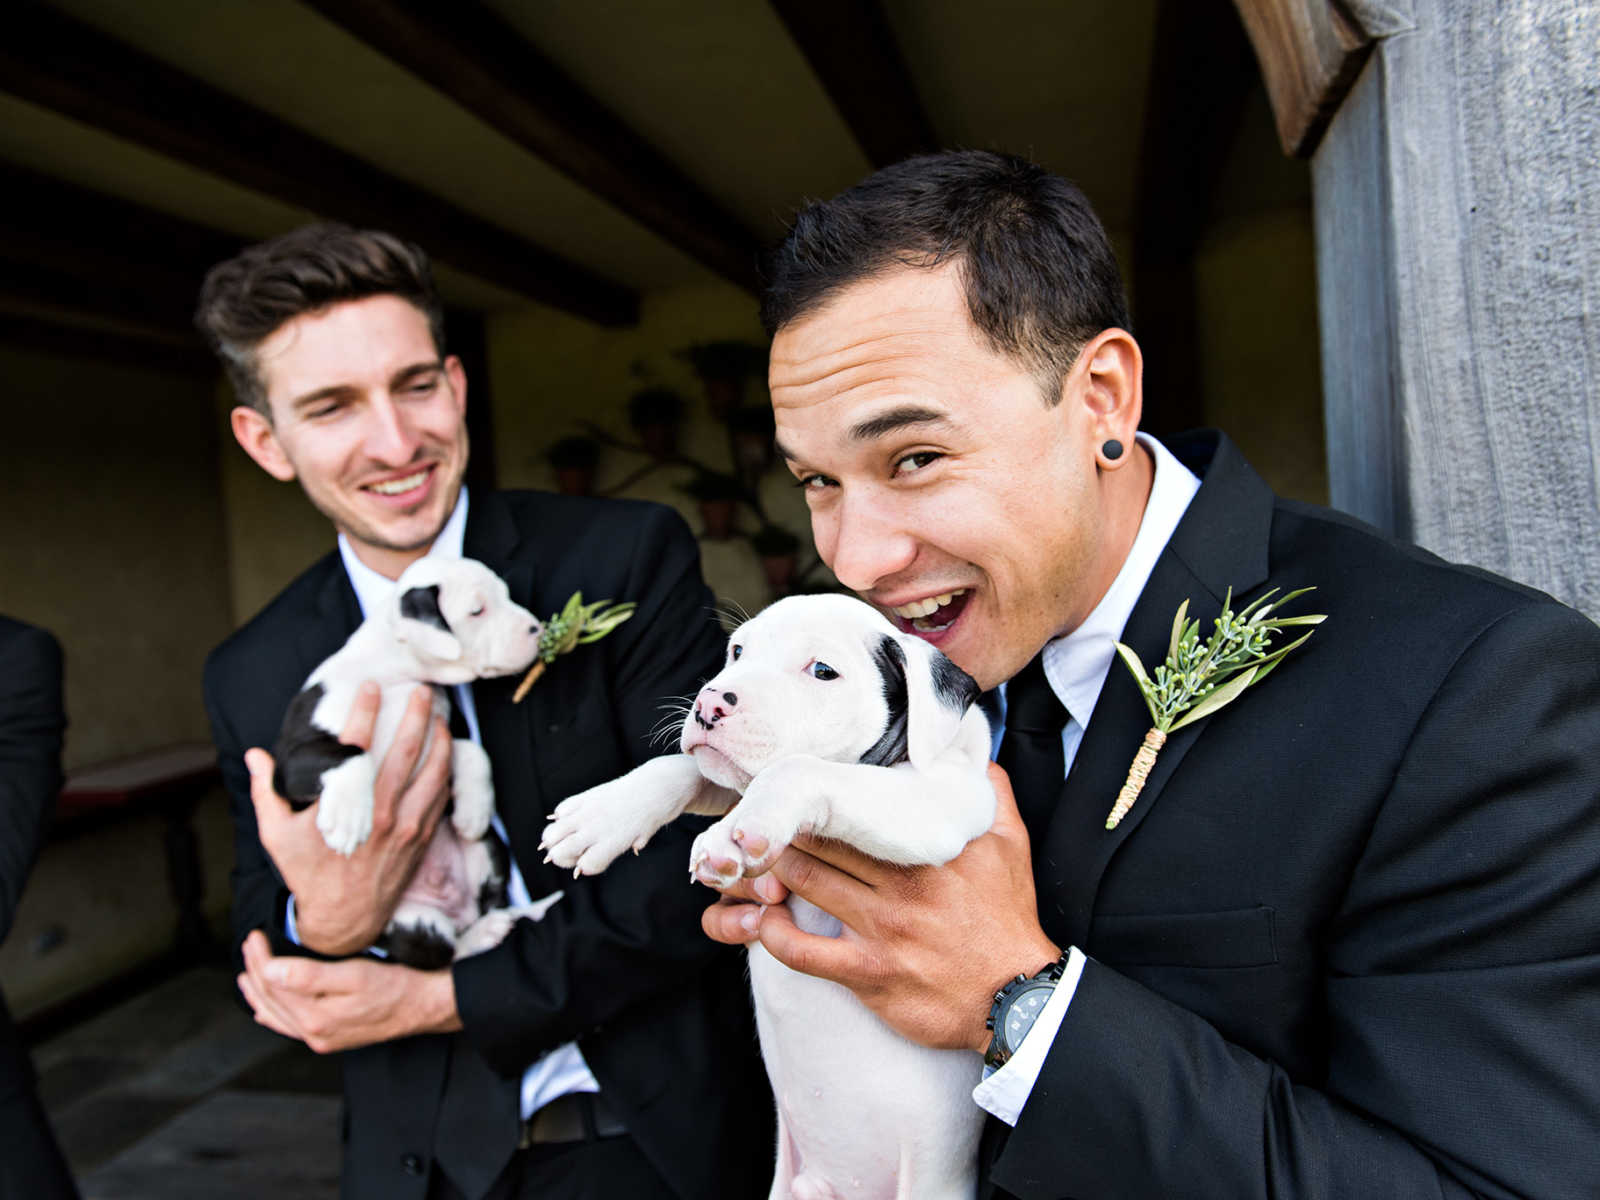 Groomsmen laugh as they both hold rescue puppies